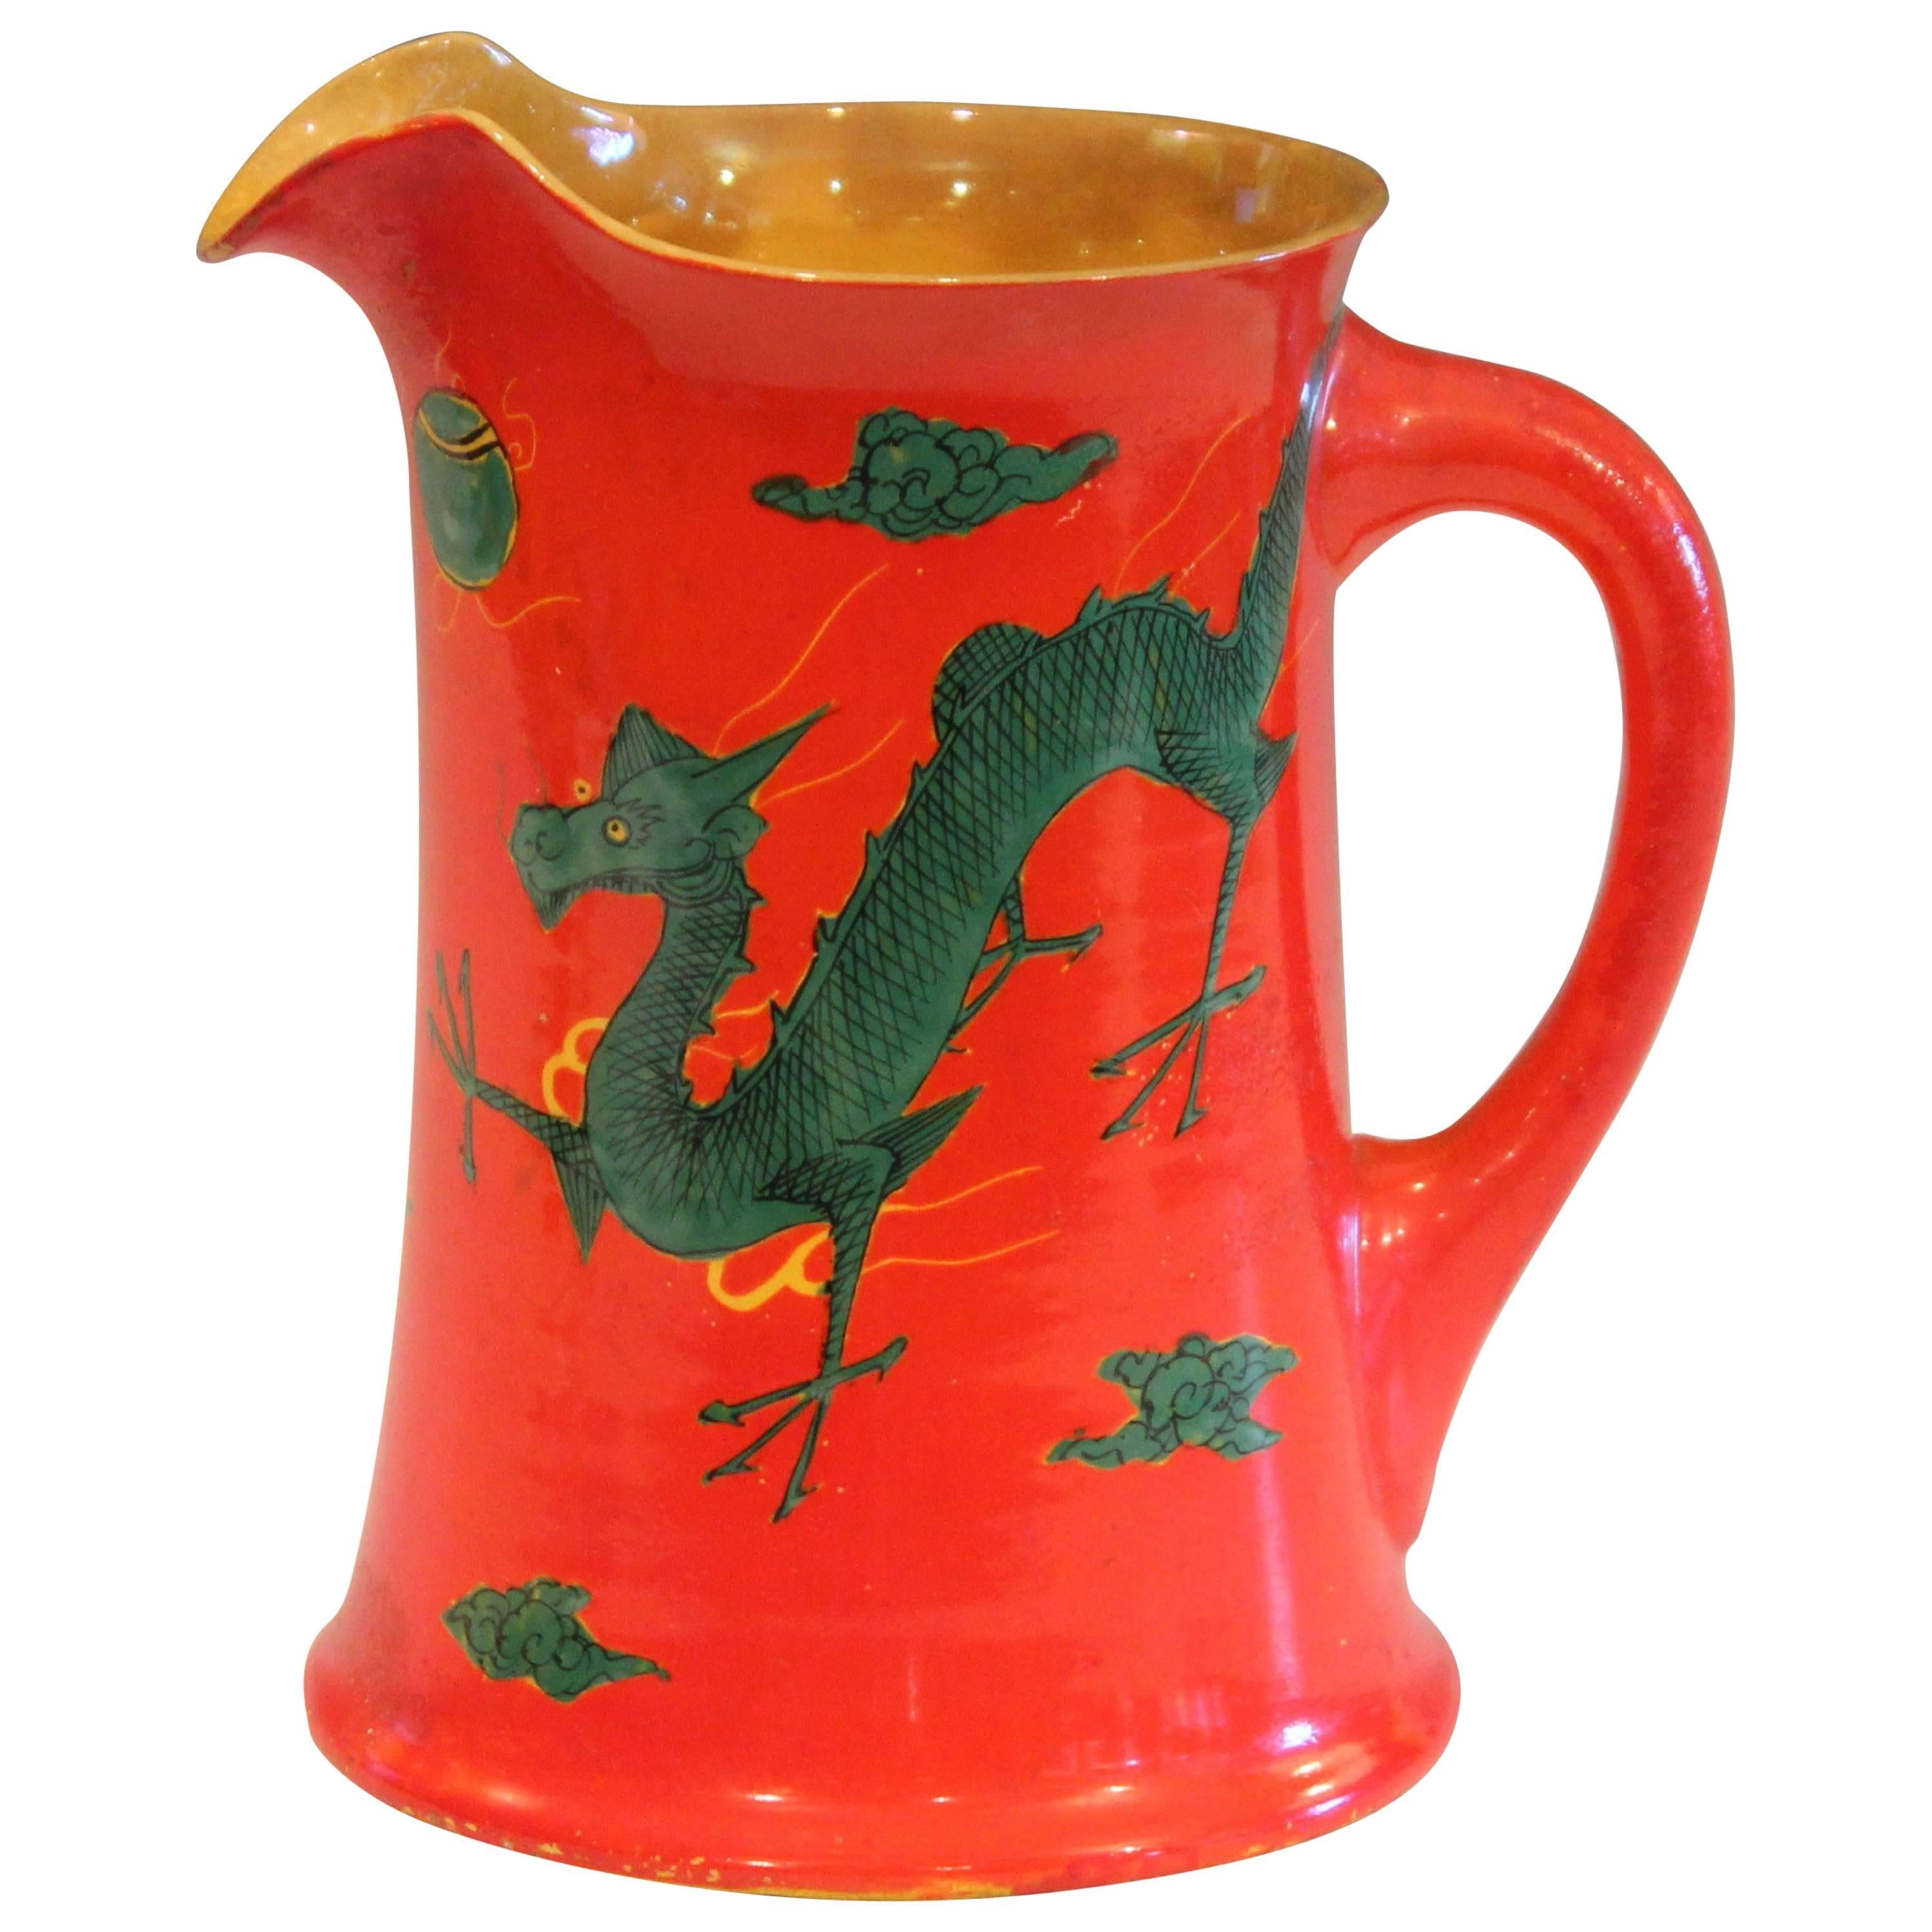 Antique Awaji Pottery Chrome Red Dragon Pitcher Vase Japanese Studio Signed For Sale